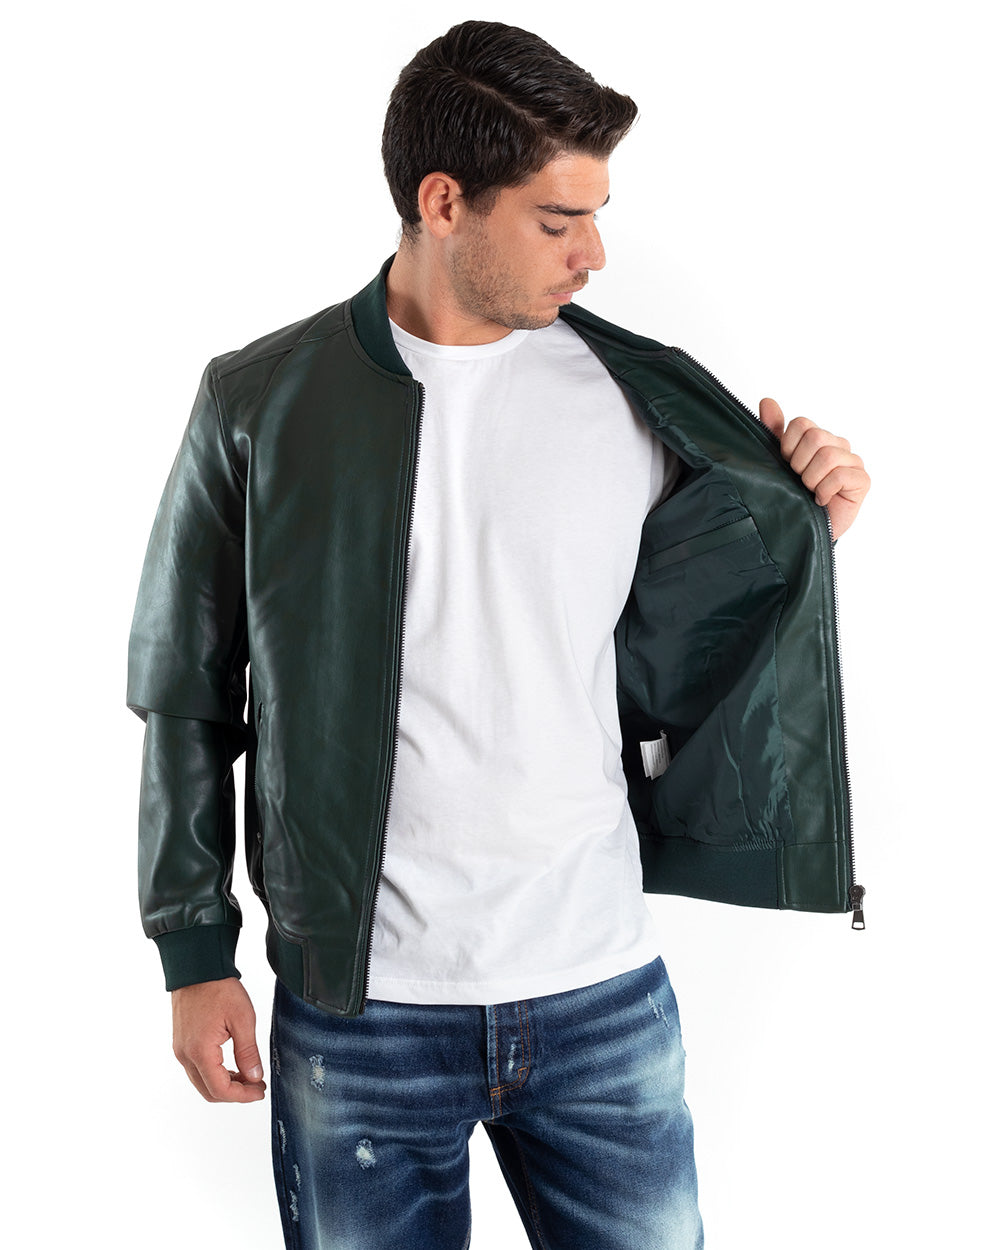 Men's College Jacket Solid Color Green Long Sleeve Faux Leather Casual GIOSAL G2866A